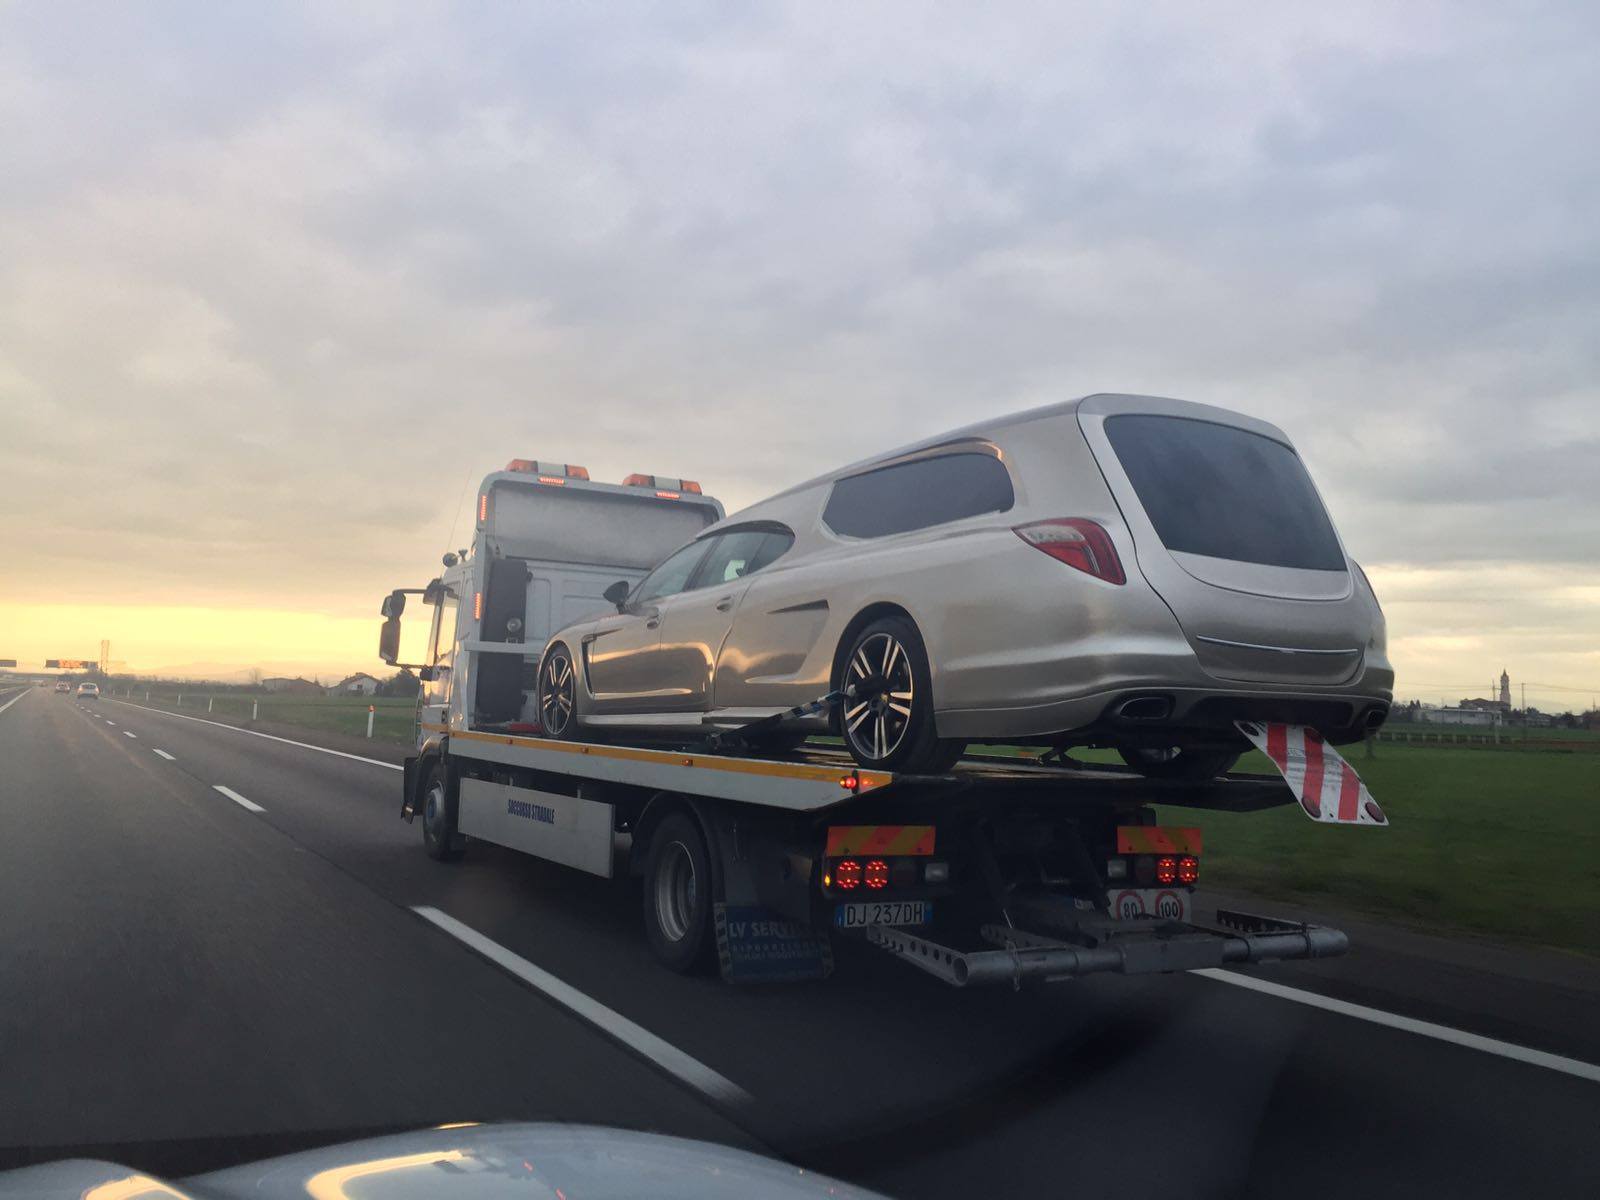 It looks like a real Porsche Panamera hearse, doesn't it? Click the image for an even larger view. 